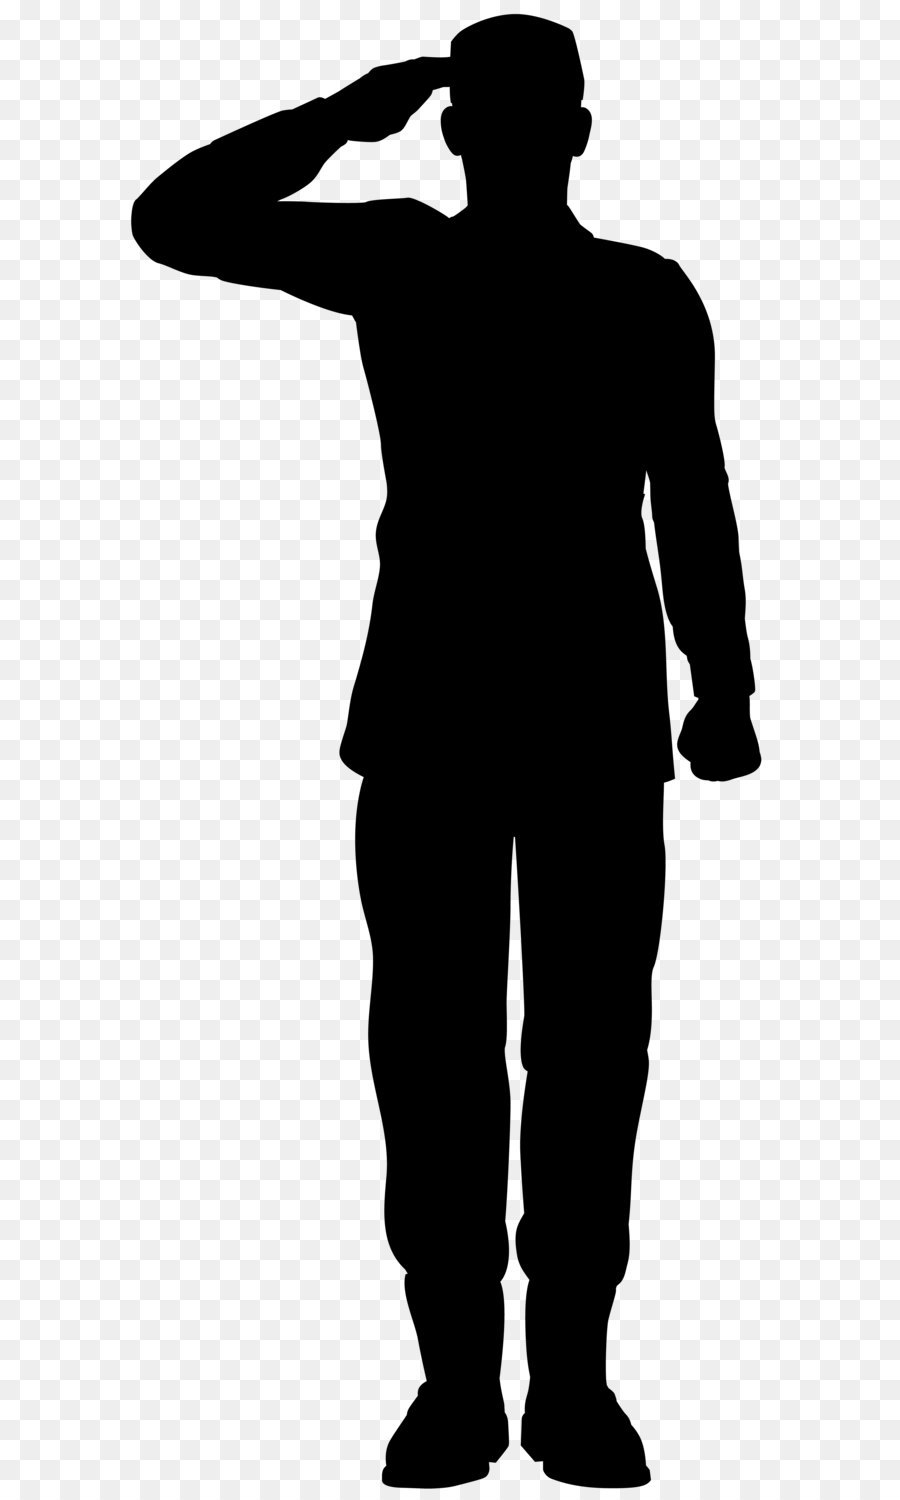 Soldier Salute Army Clip art - Army Soldier Saluting Silhouette PNG Clip Art Image png download - 3472*8000 - Free Transparent Soldier png Download.